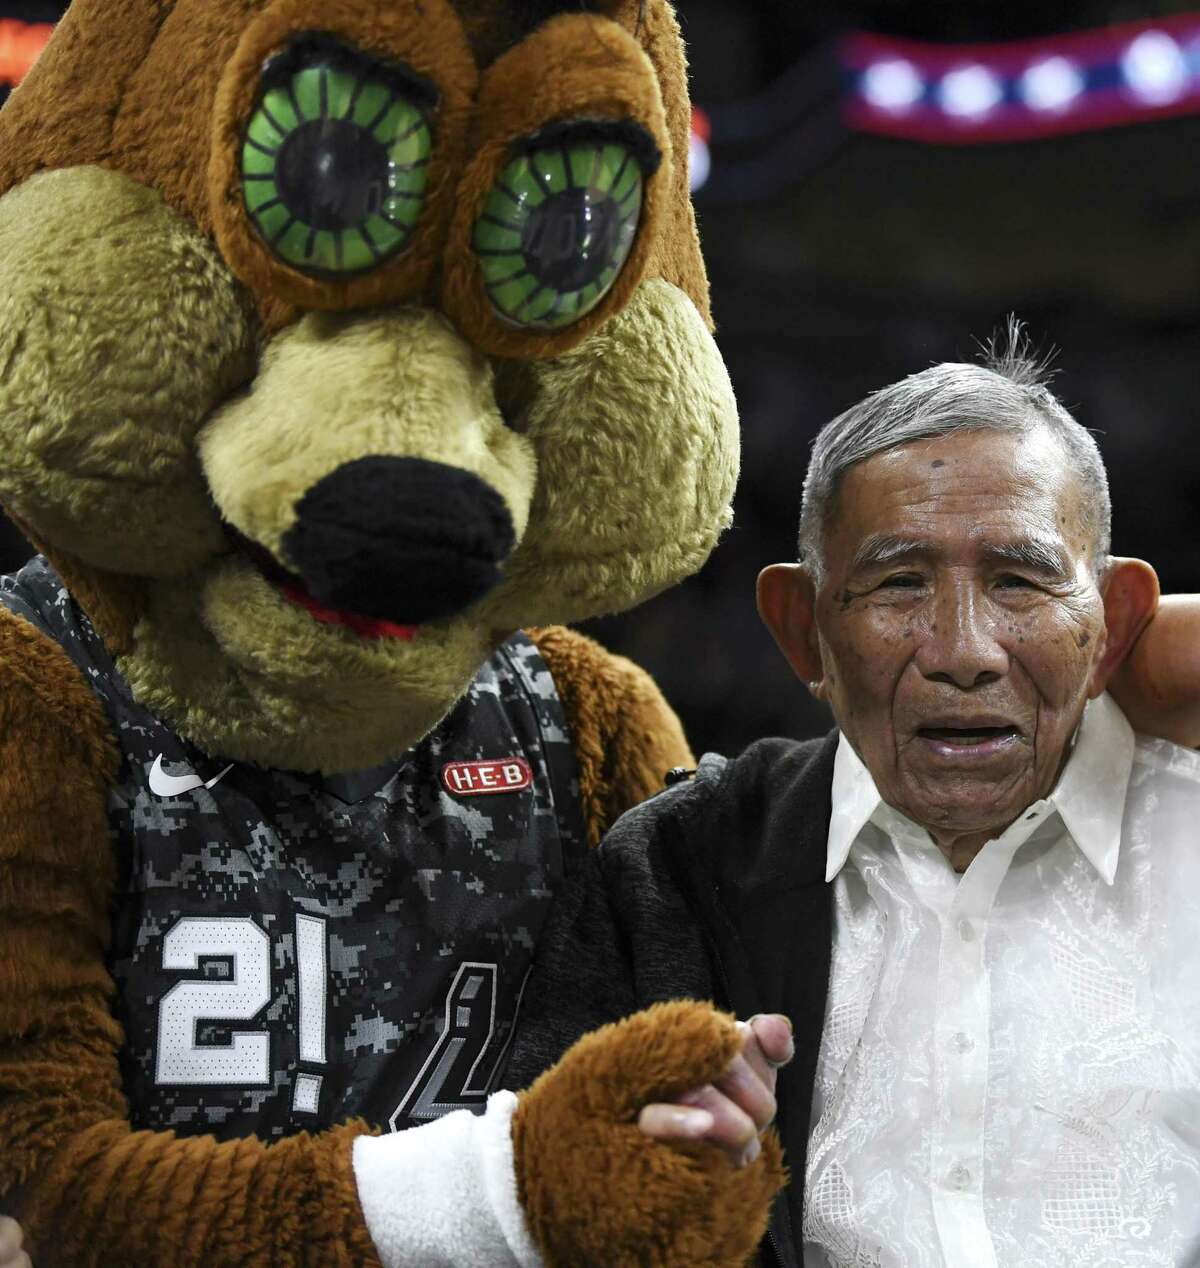 Liban Brillantes, 103, who was born in the Philippines and served in the Army’s 121st Infantry Division, is honored during a timeout of the Miami Heat at San Antonio Spurs NBA game in the AT&T Center on Wednesday, March 20, 2019. Brillantes was only 19 when he served as a messenger between the U.S. and Philippine governments during World War II. He witnessed an execution of prisoners by Japanese soldiers and found one prisoner alive. He carried him into the jungle and nursed him back to health.